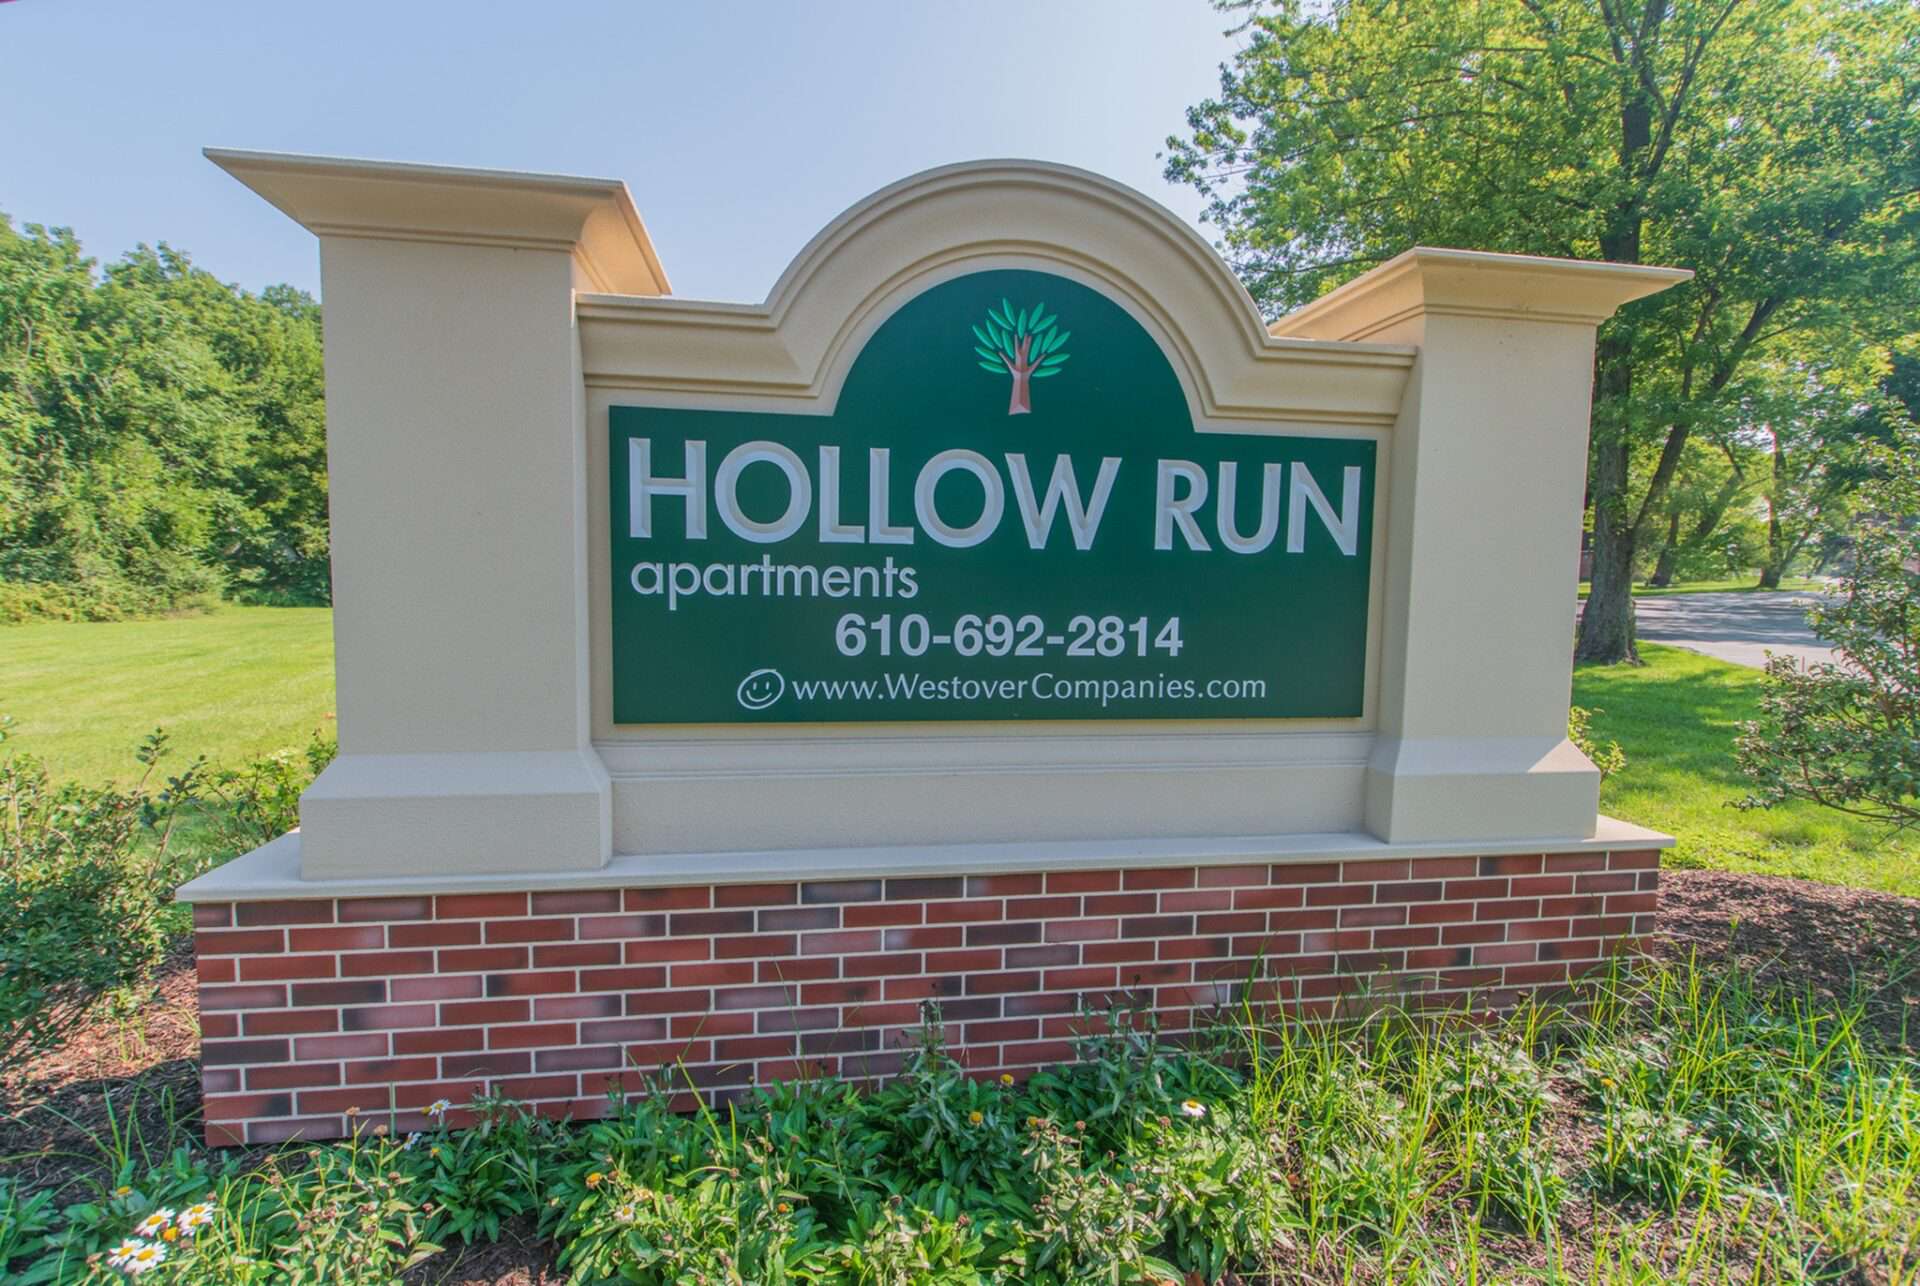 Hollow Run Apartments sign with grass and plants around it.